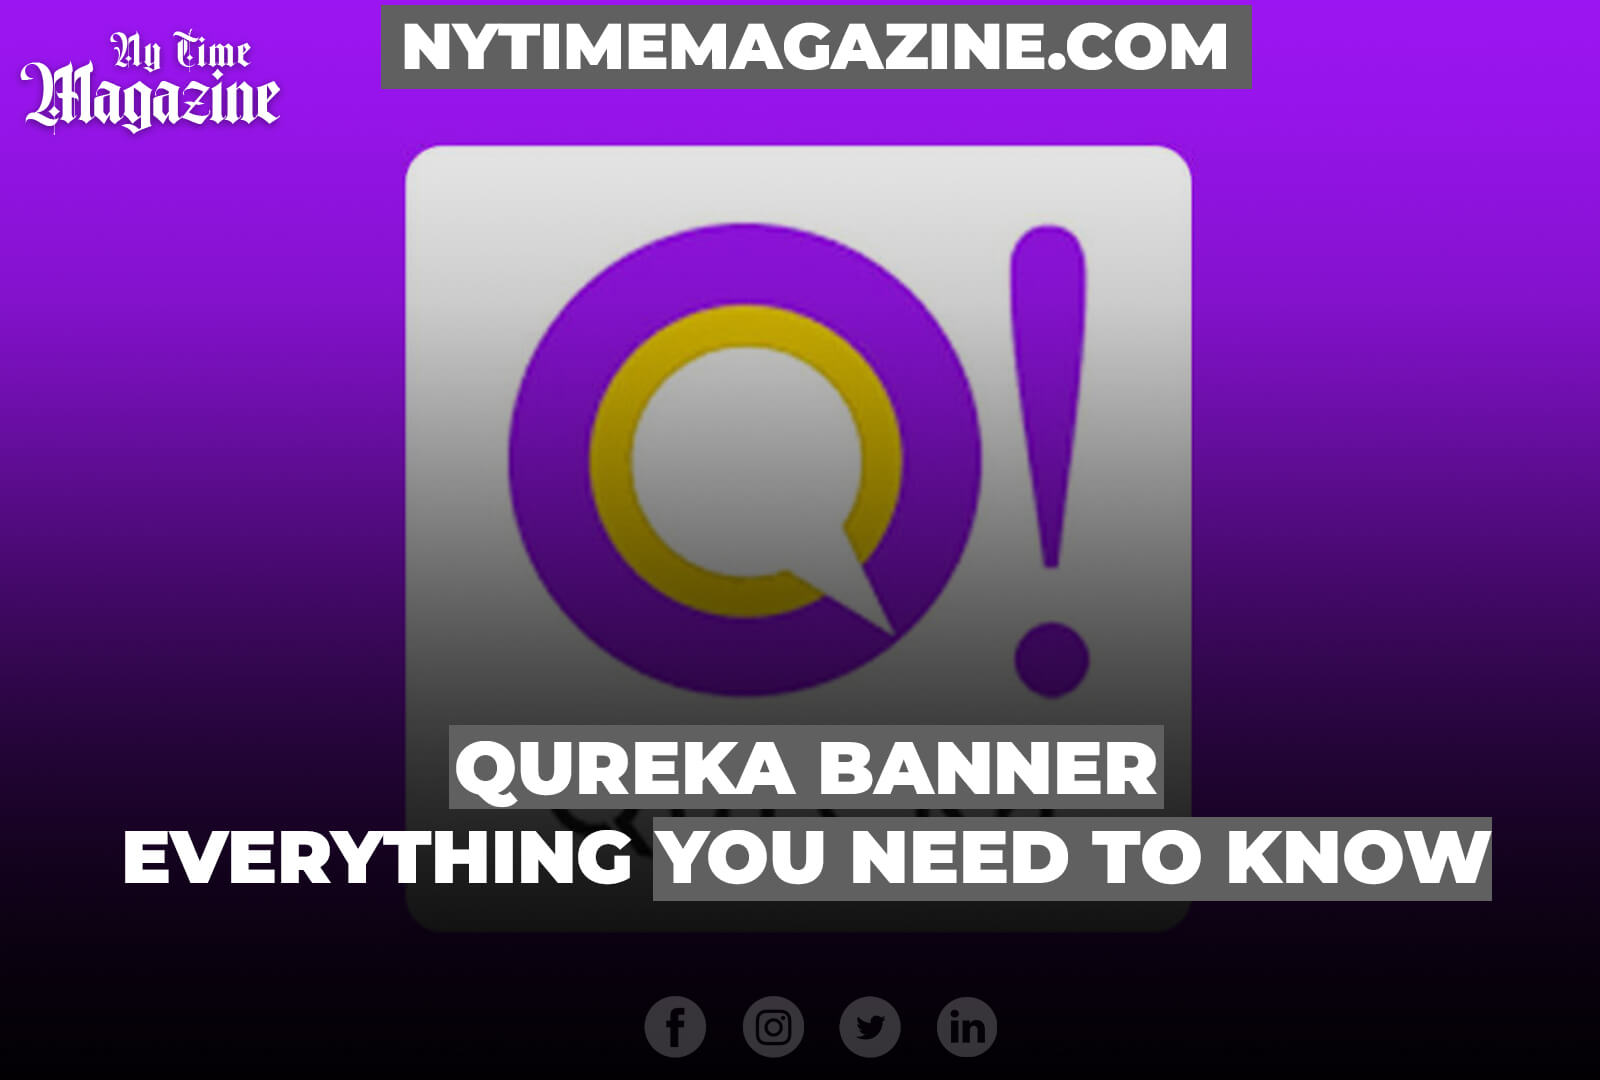 QUREKA BANNER – EVERYTHING YOU NEED TO KNOW